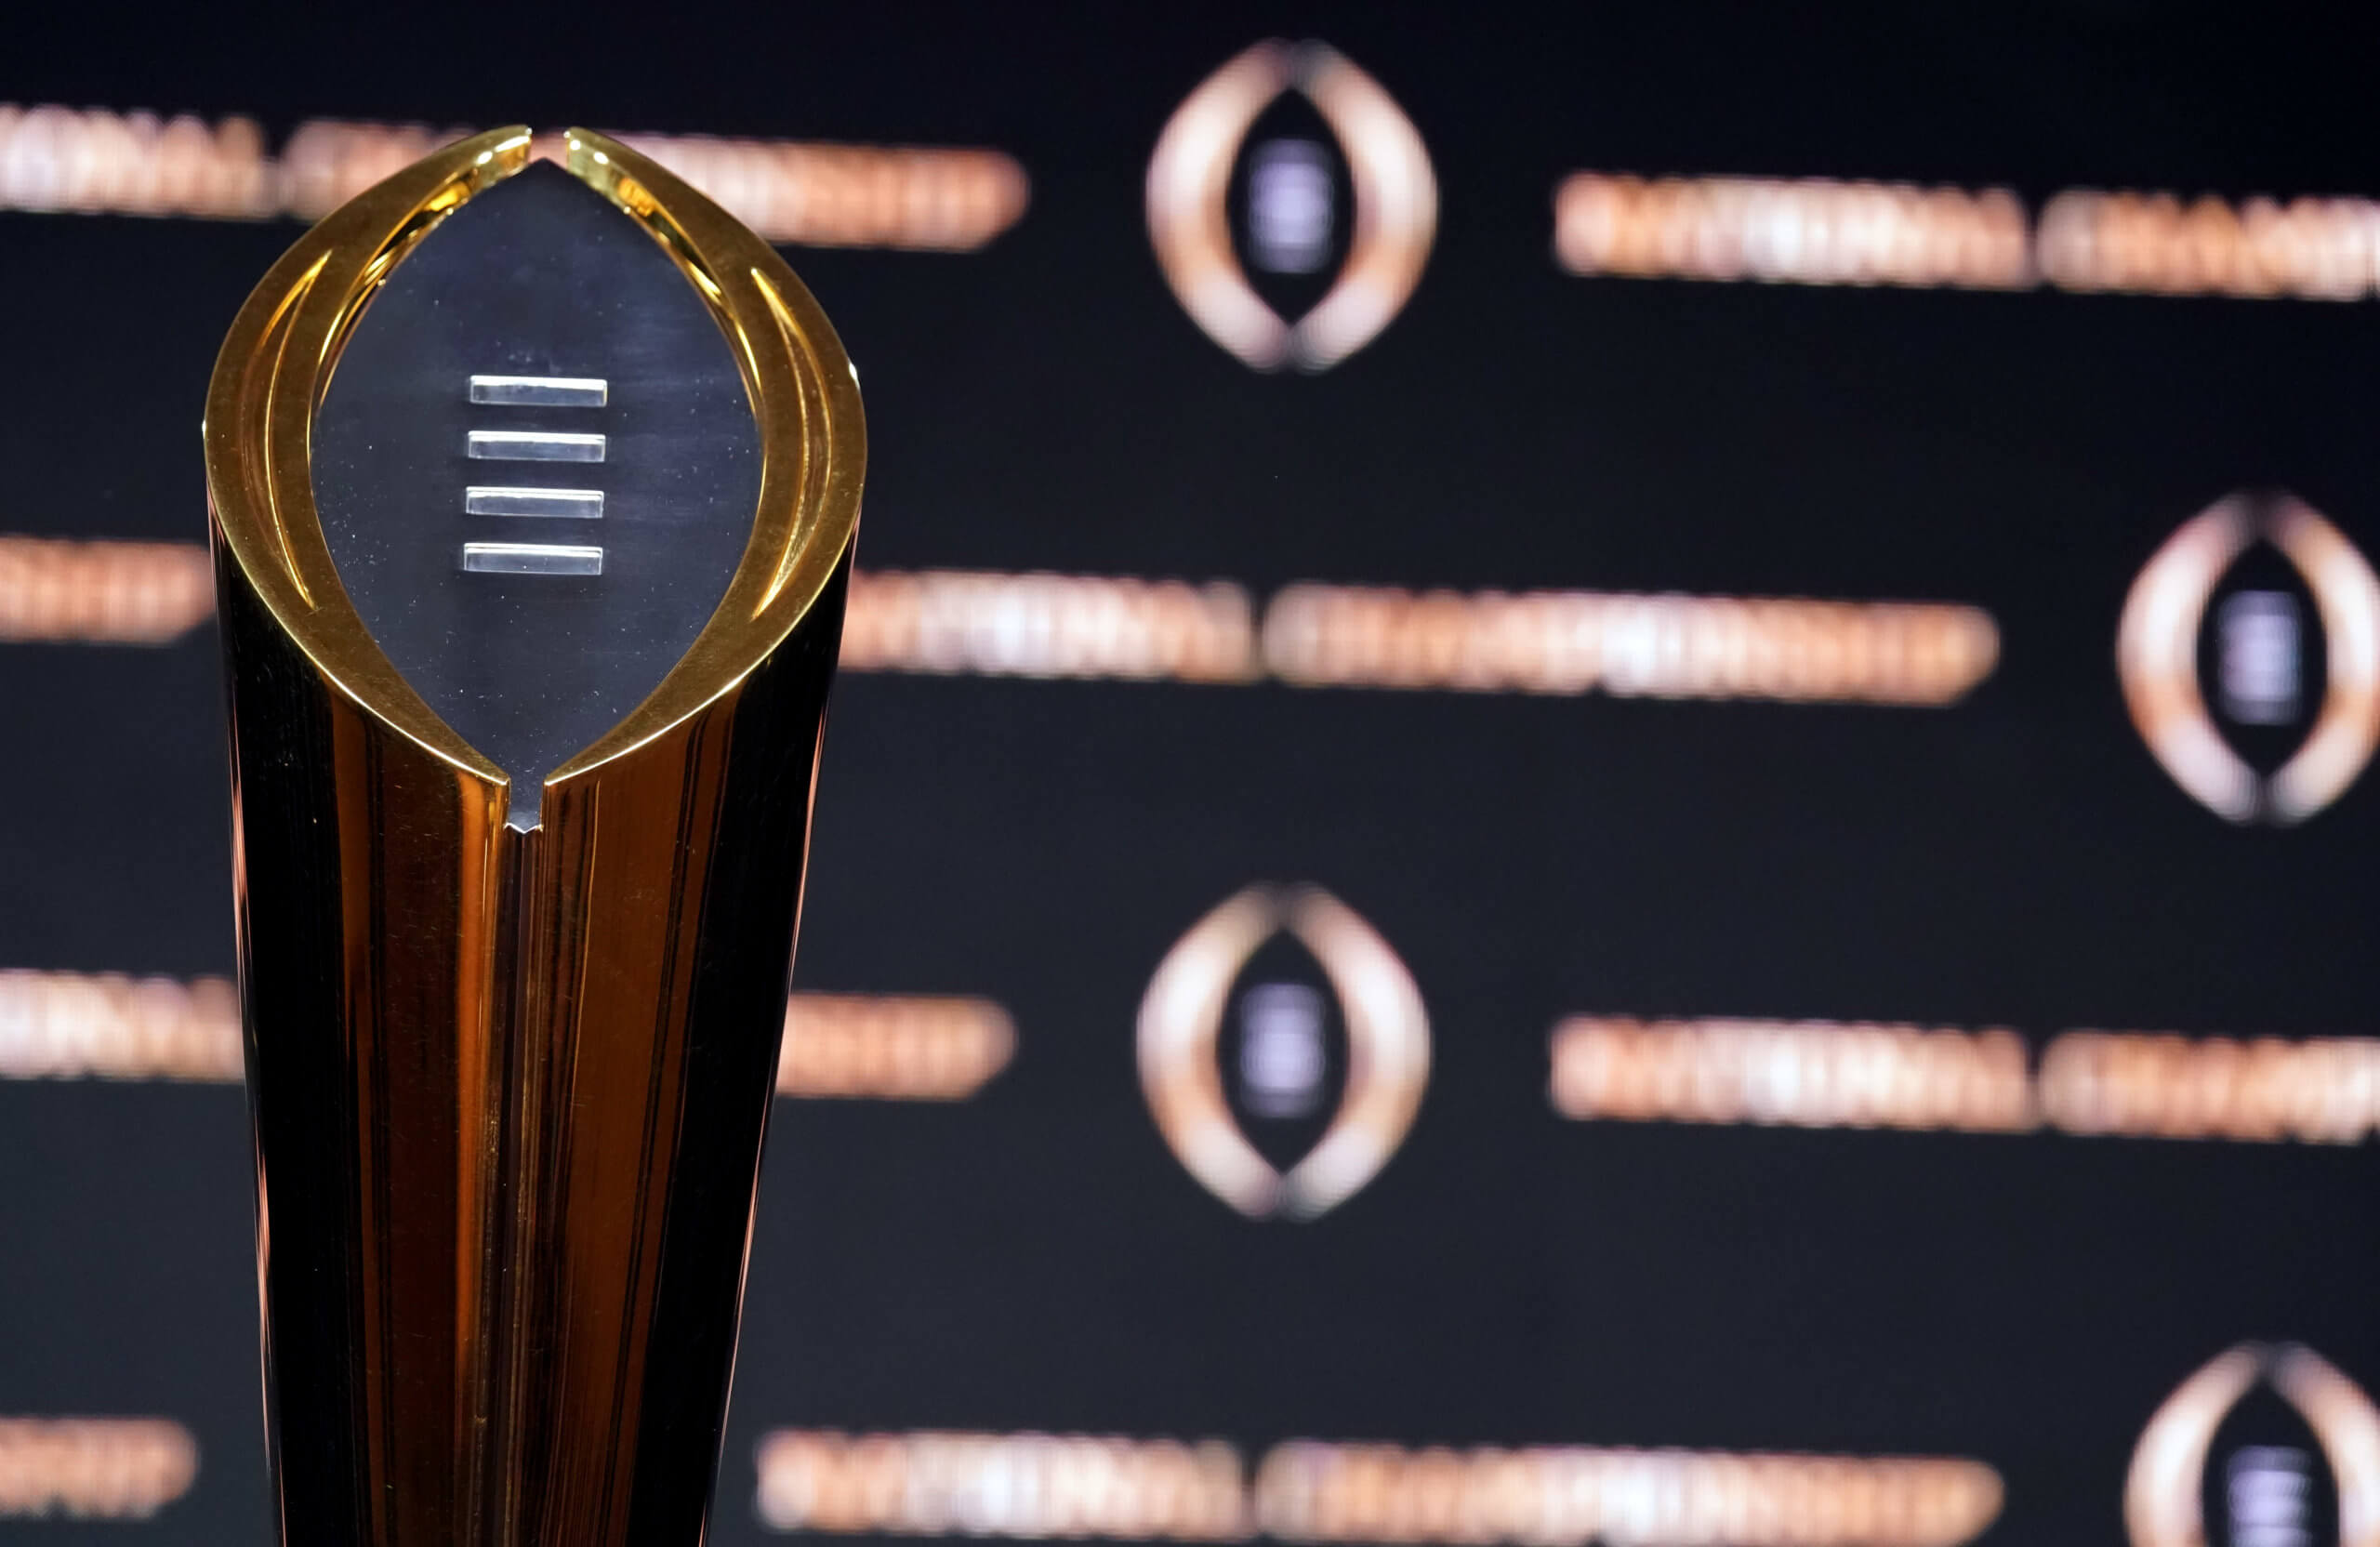 National Championship winner: Who won College Football Playoff in 2021? -  DraftKings Network